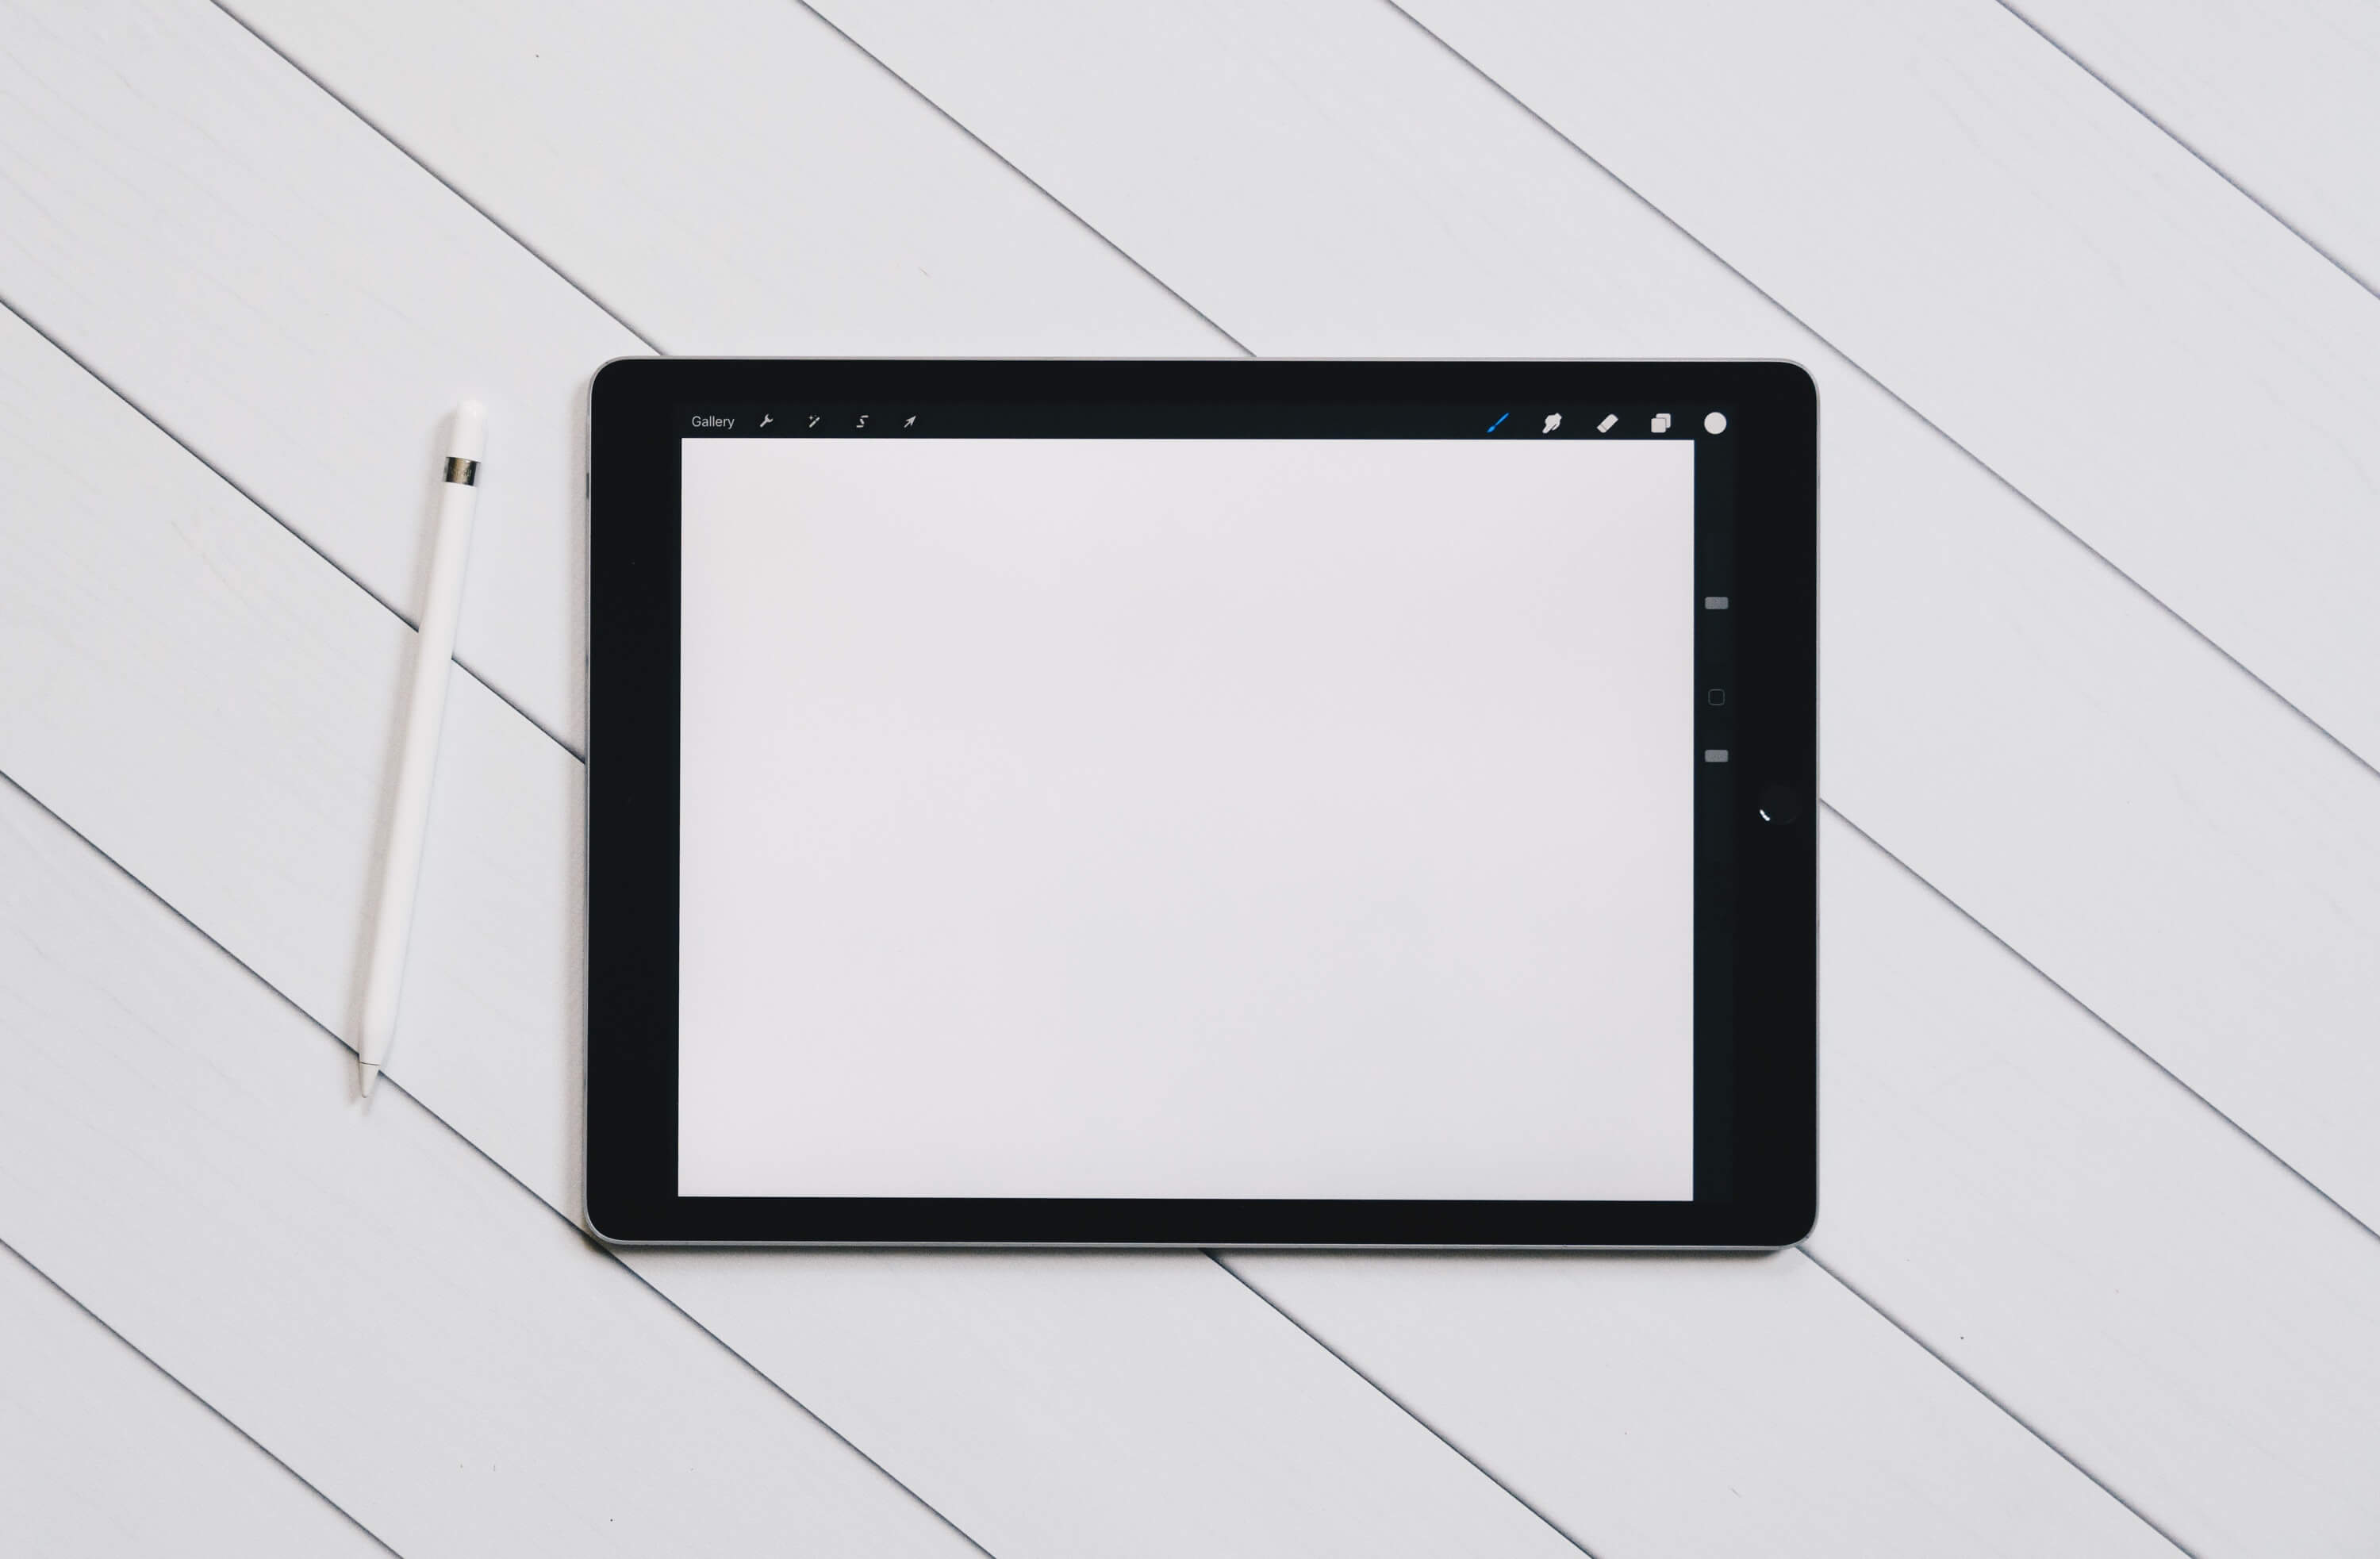 Tablet on white surface